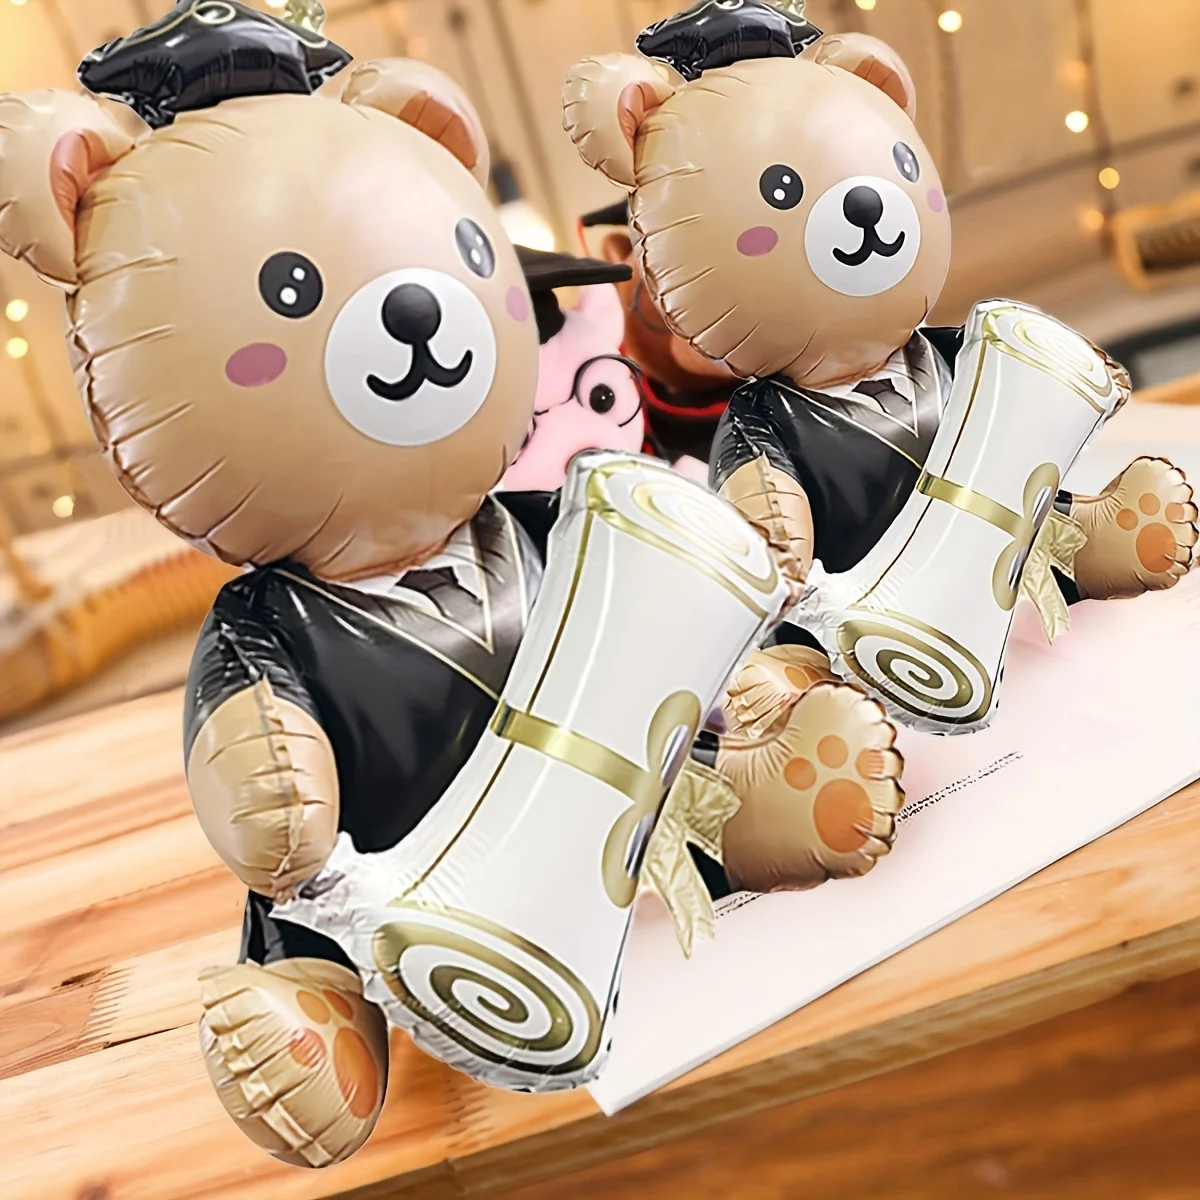 1pc Cute Holding Graduation Bear Aluminum Film Balloon, Graduation Party Balloon Perfect For School Events And Campus Decoration